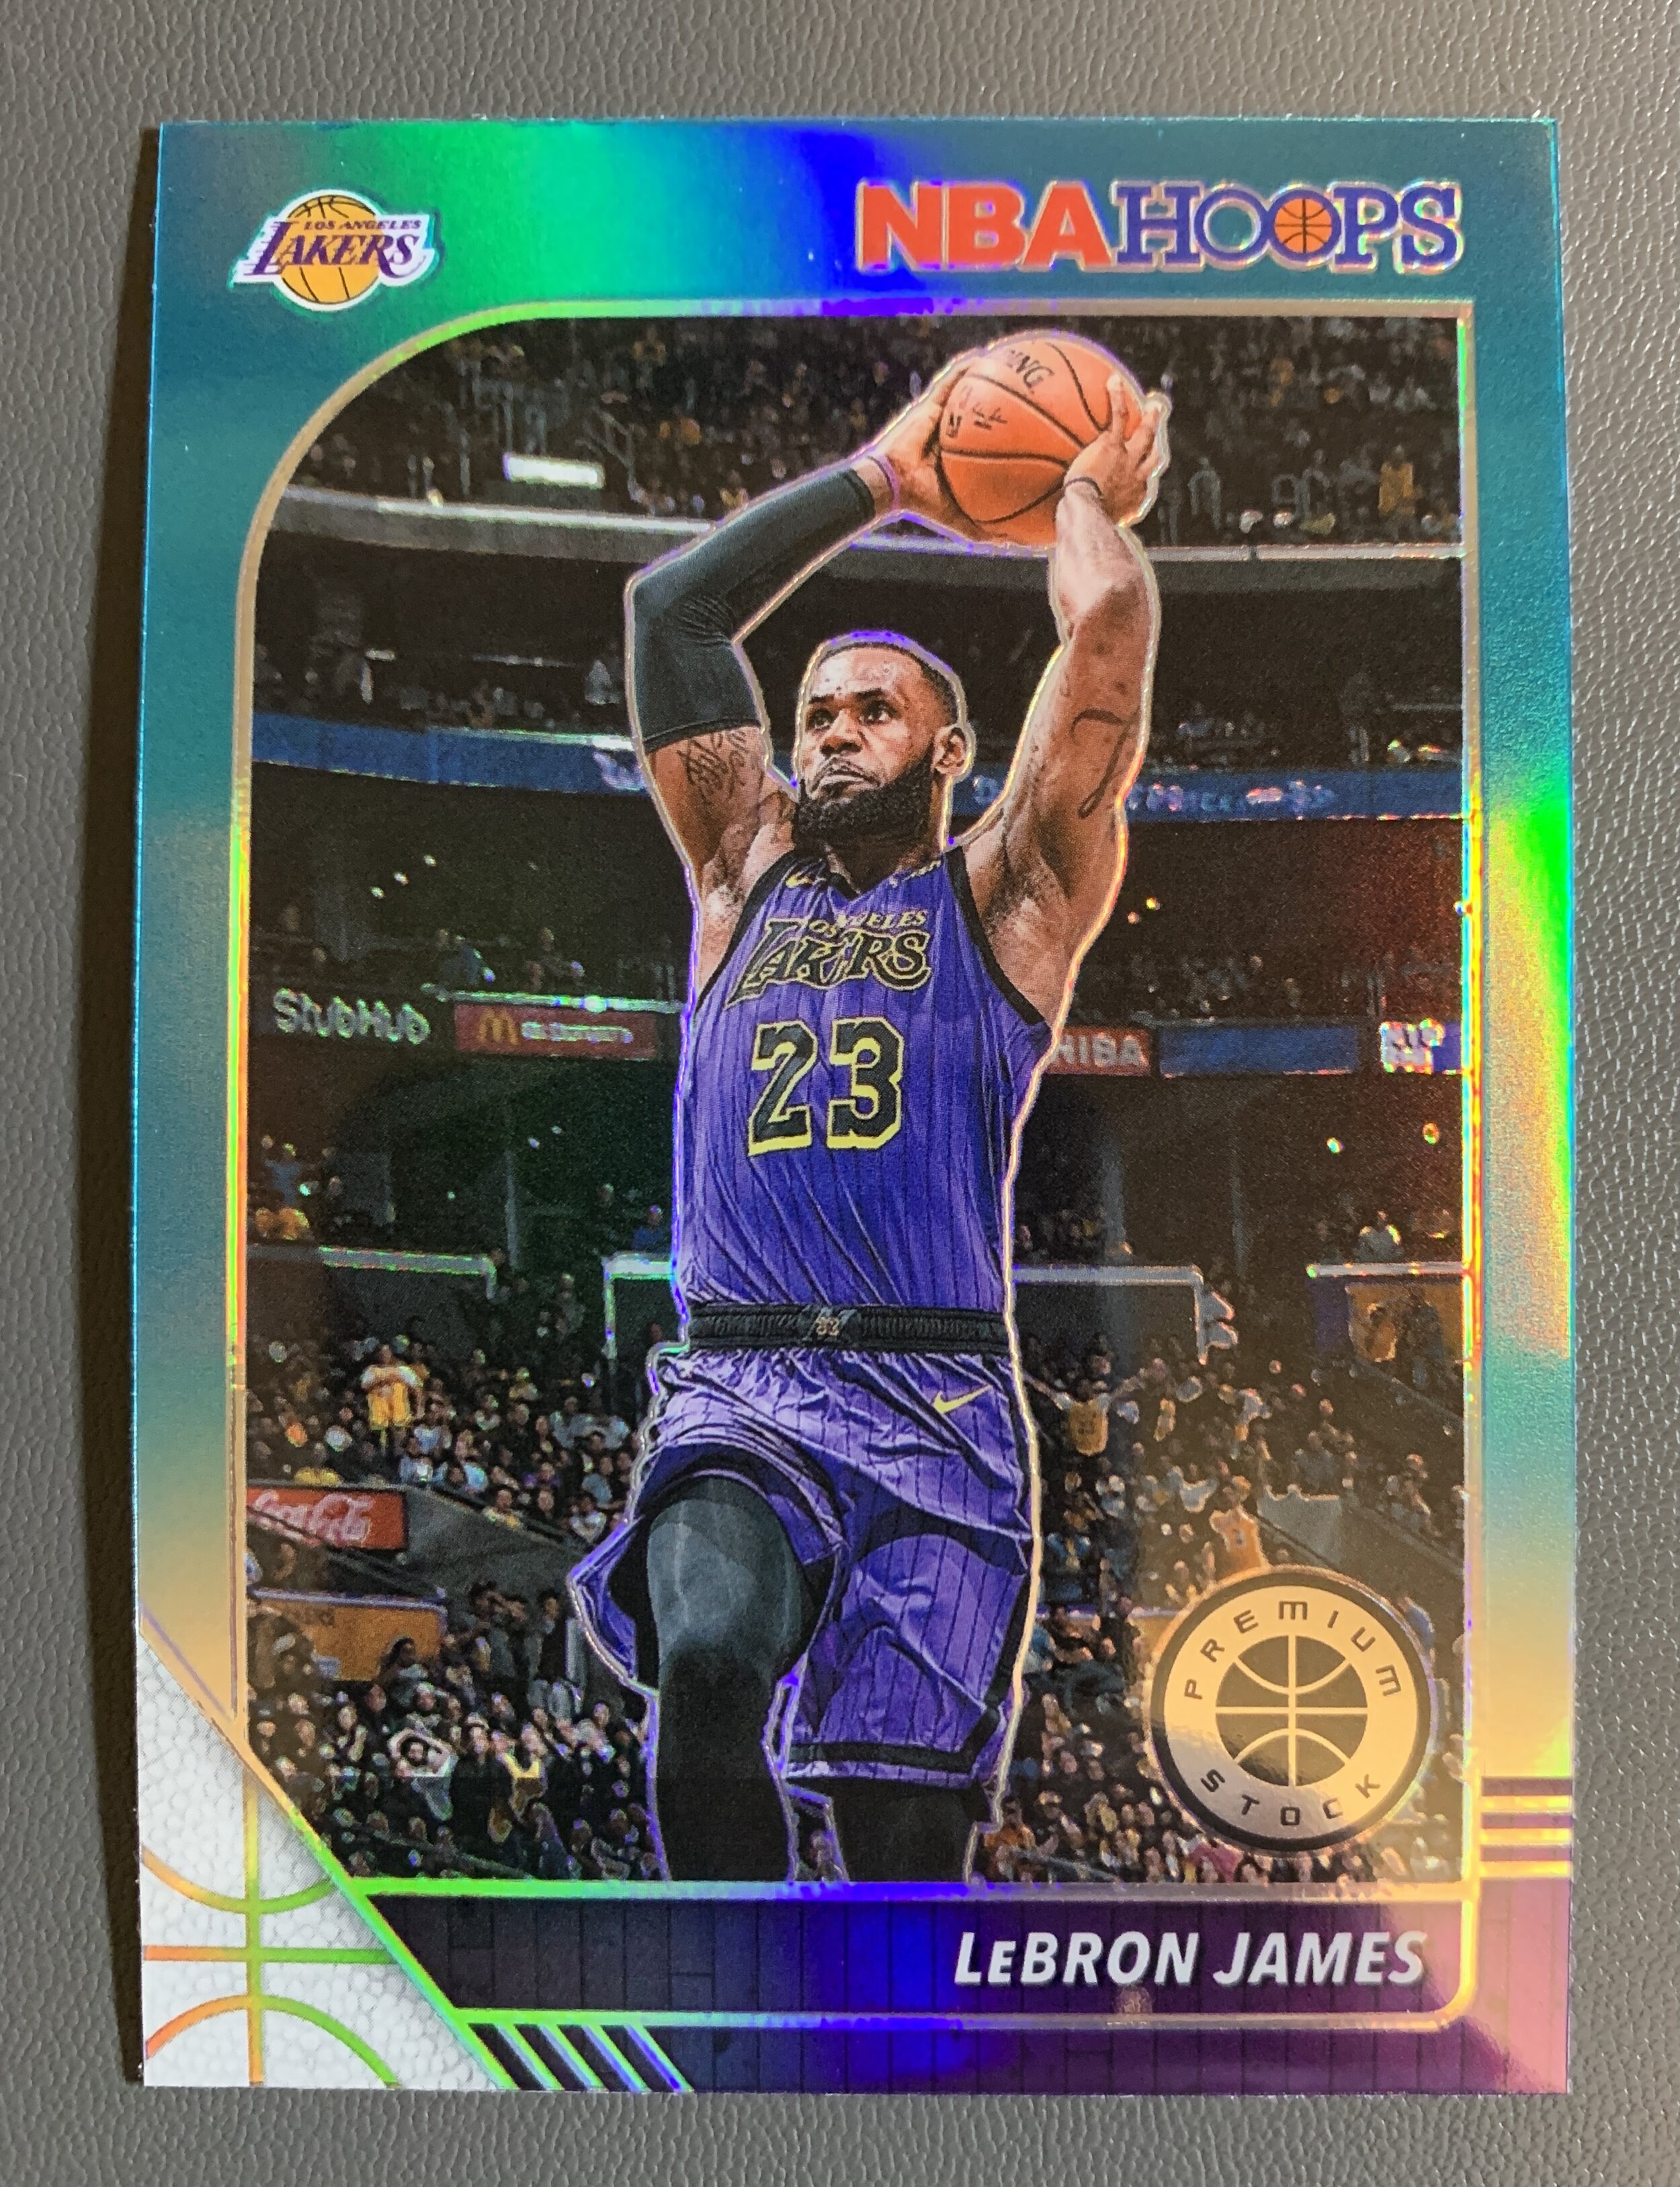 LeBron, making his second appearance in this post, looking good in Teal. Although the color looks a bit green here, don’t mistake Teal Prizms for Green Prizms. There’s a substantial difference in print run.